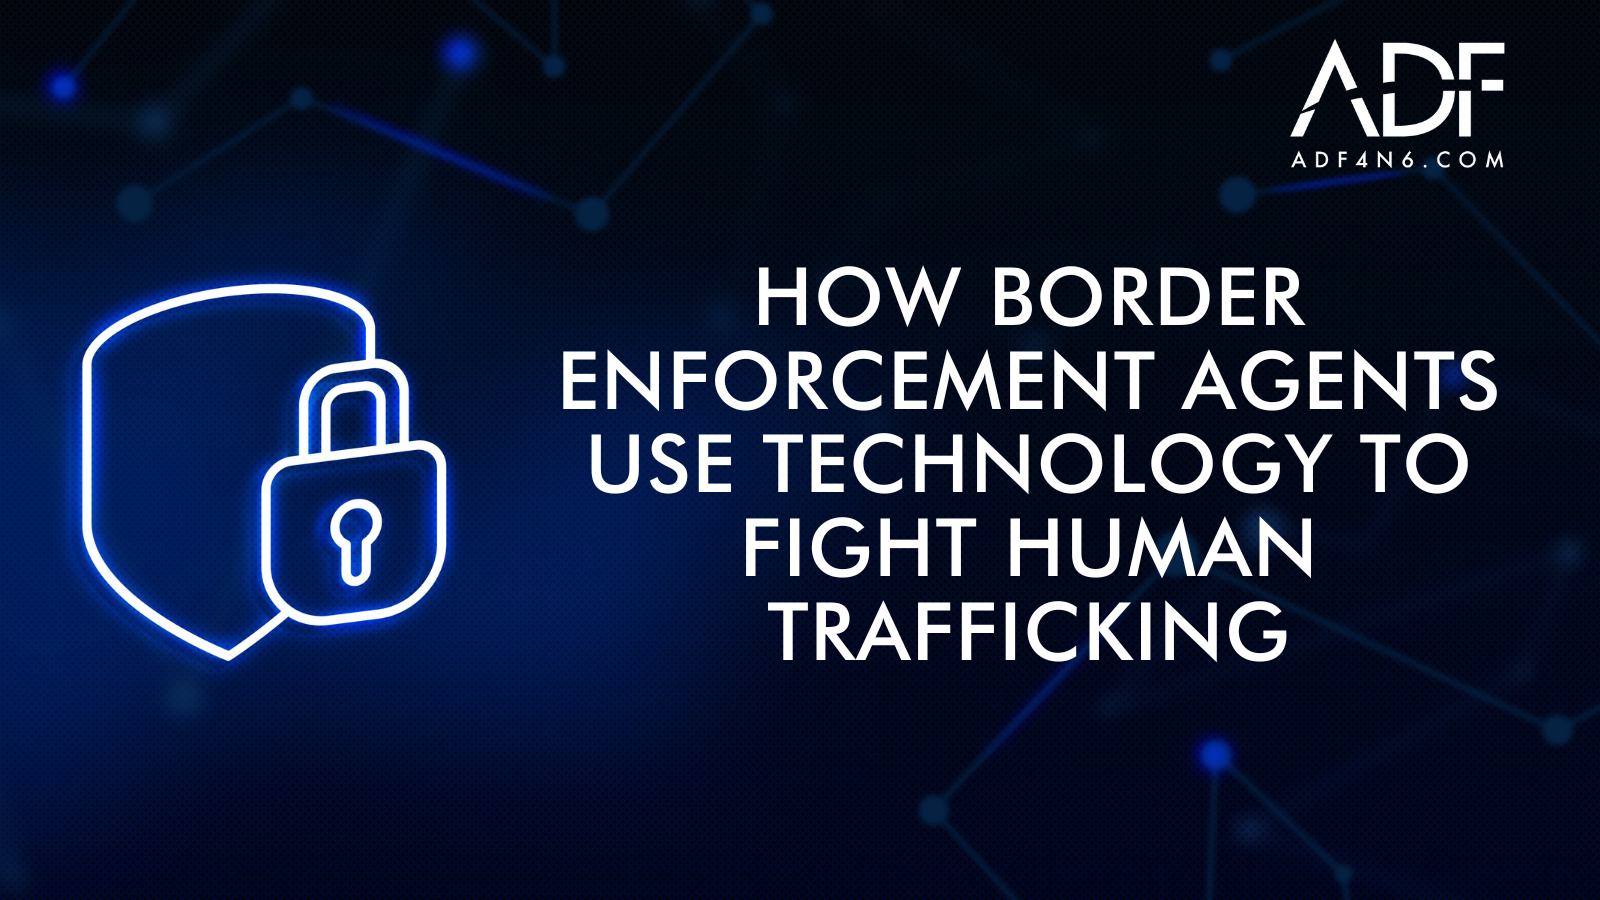 How Border Enforcement Agents Use Technology to Fight Human Trafficking